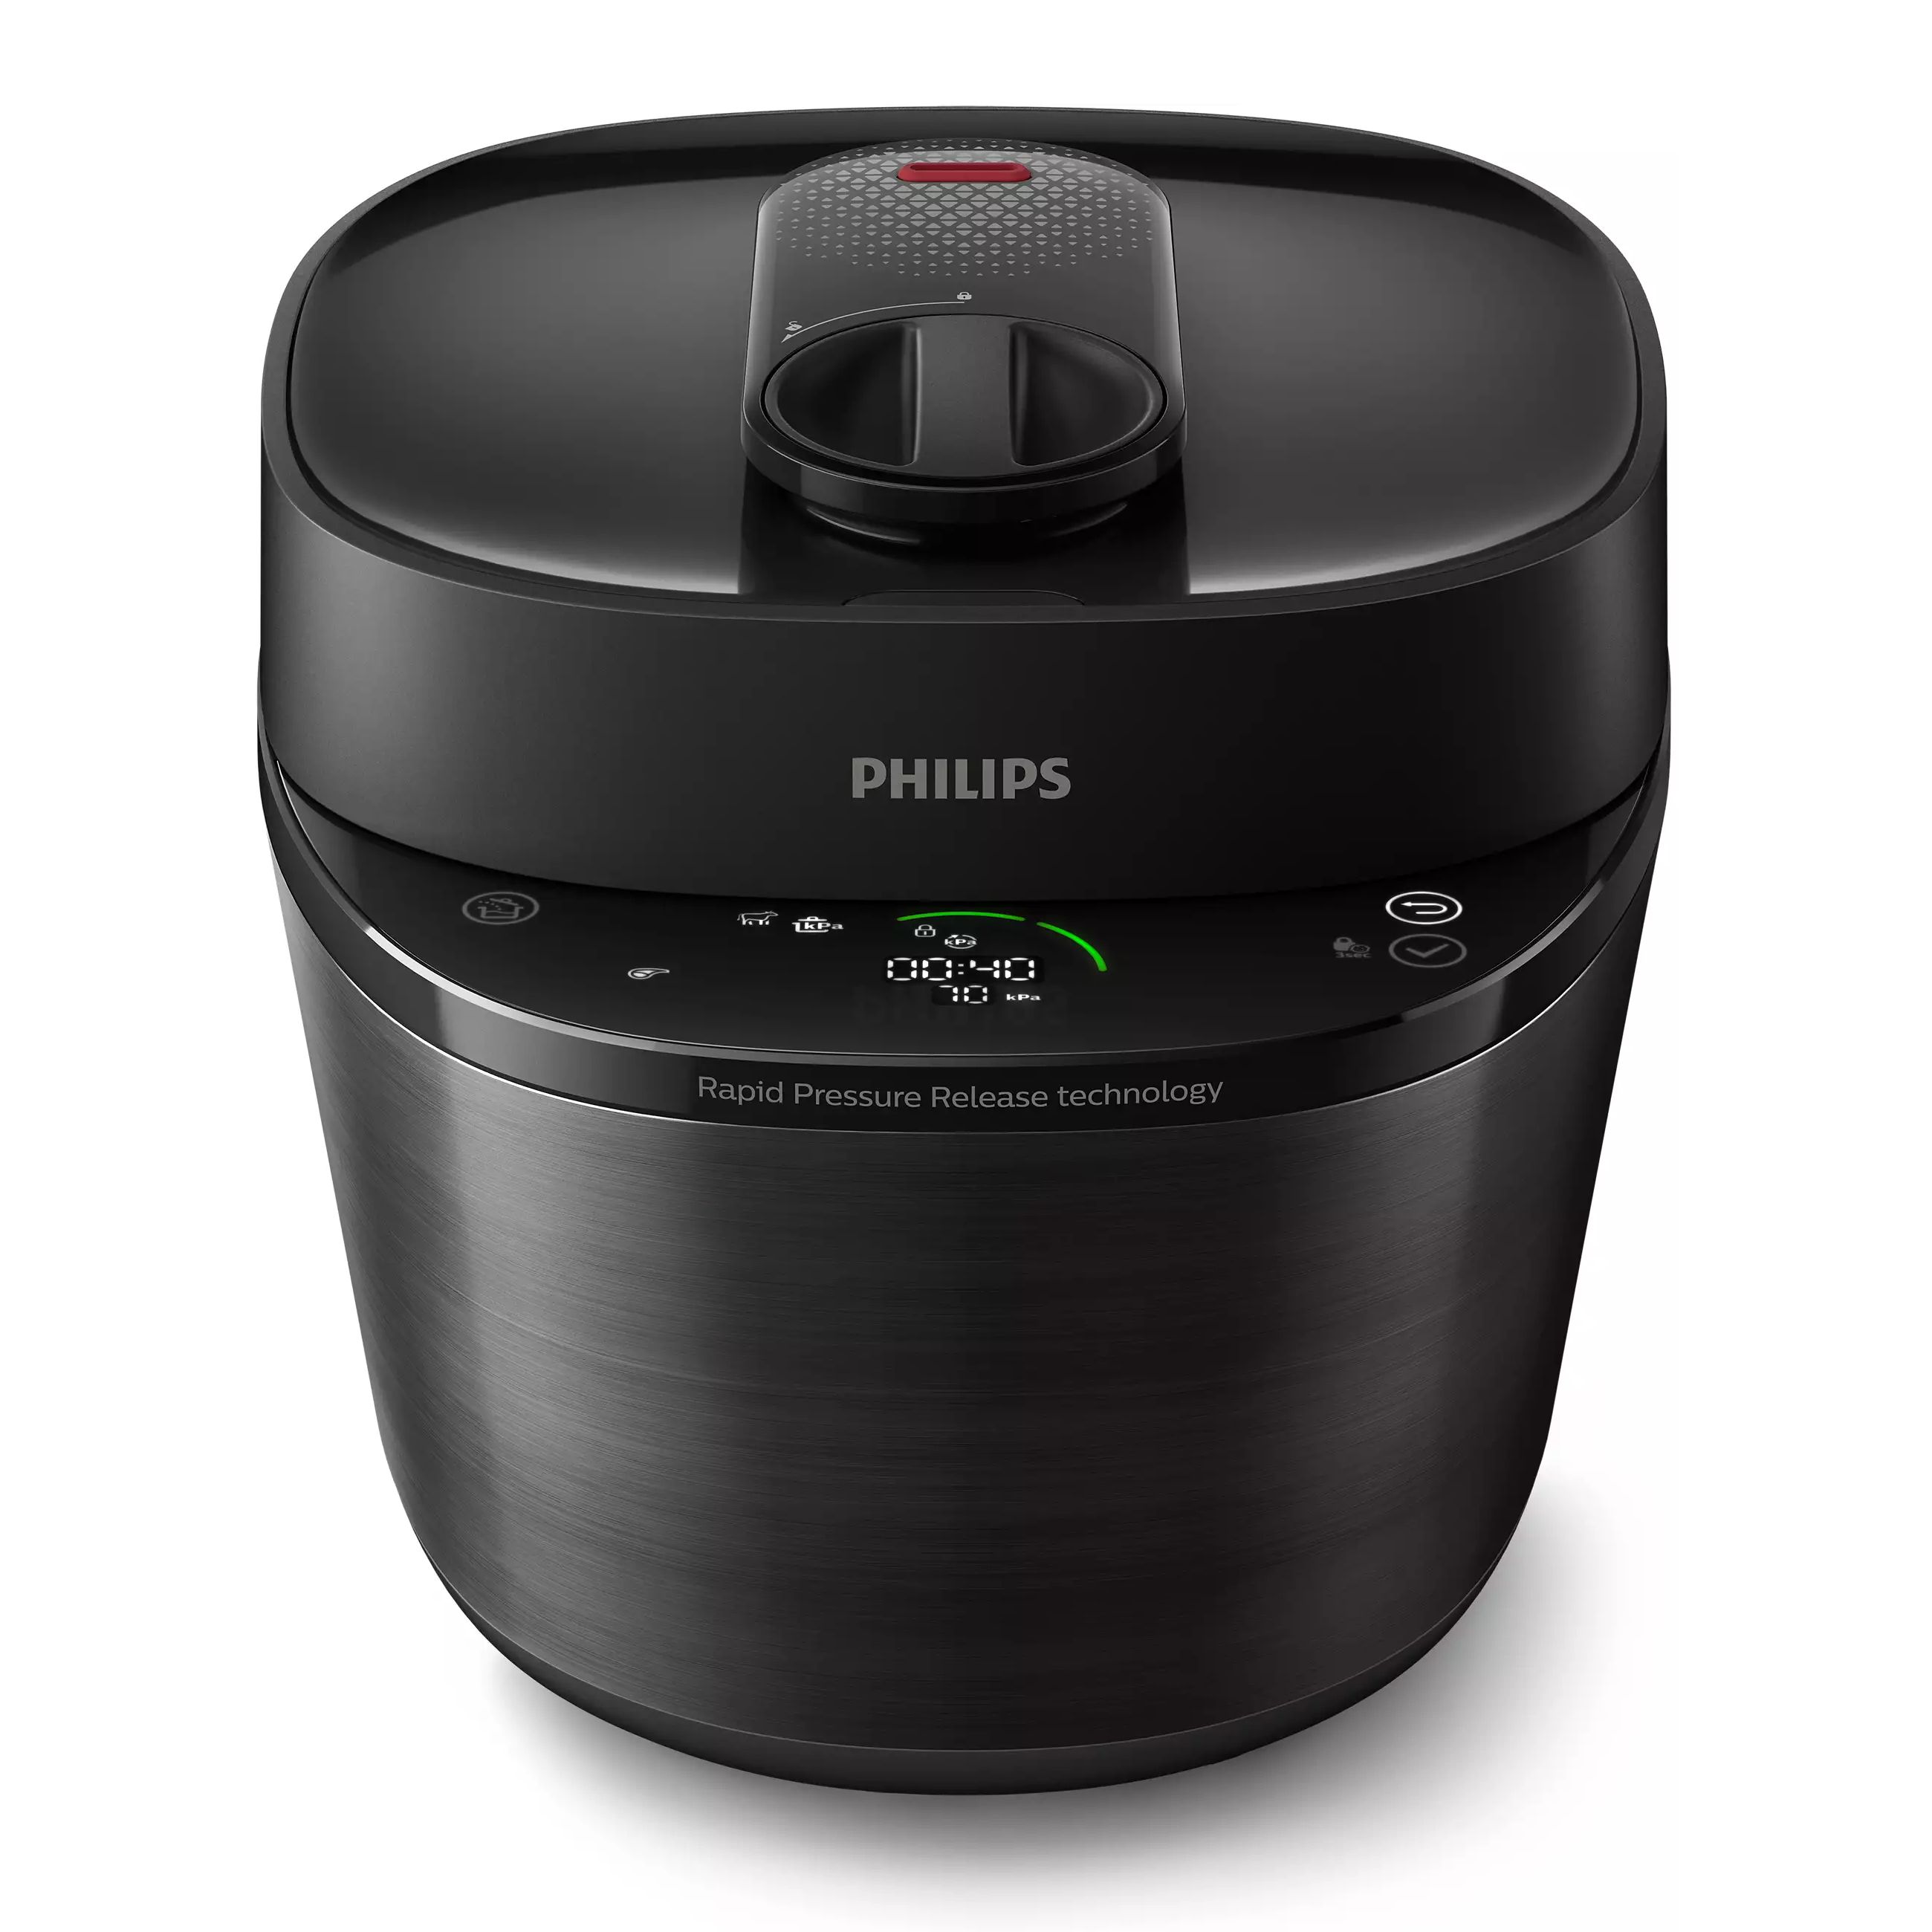 PHILIPS ALL-IN-ONE智能萬用鍋 HD2151/80 黑色